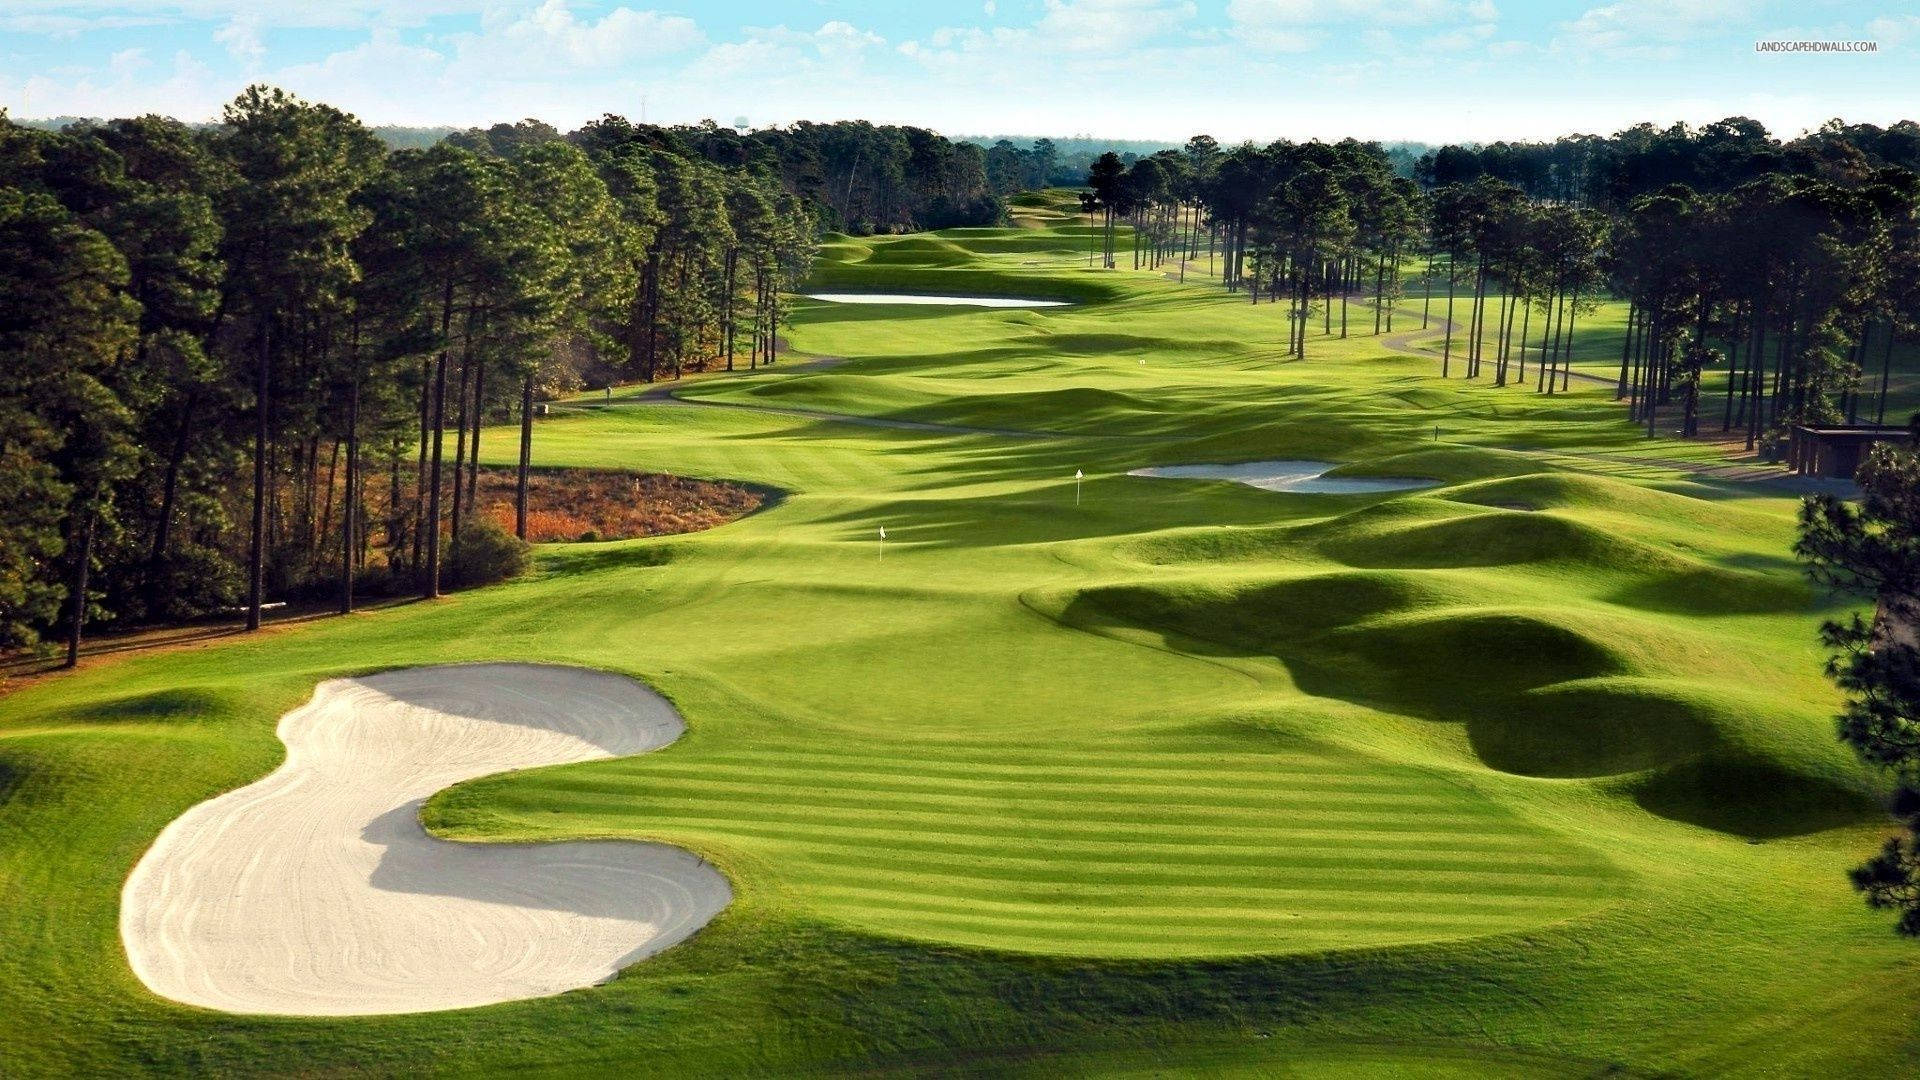 Cool Golf Augusta National Full Course Background